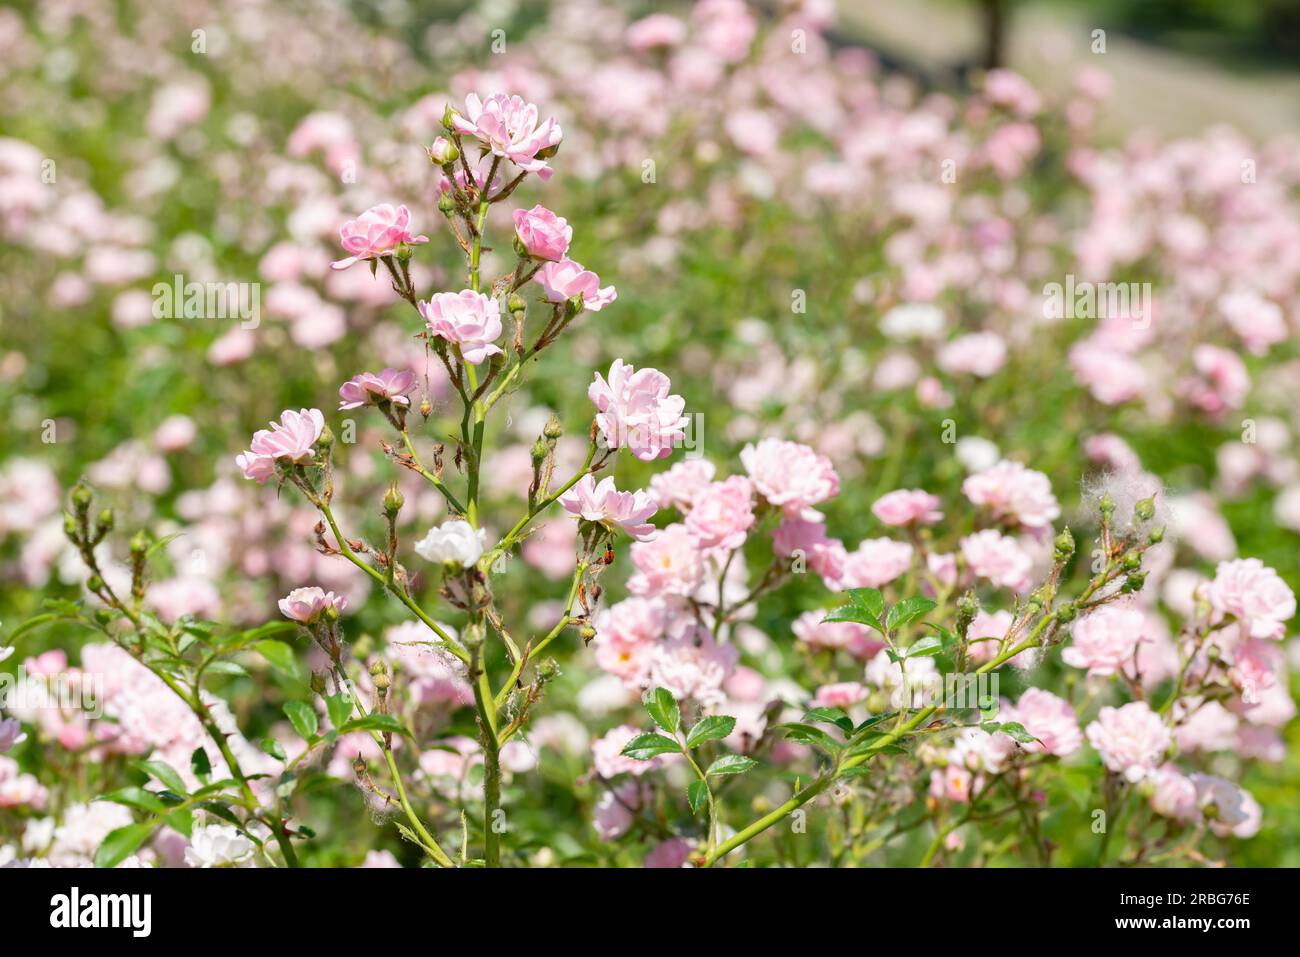 Pink Polyantha Shrub Roses also known as The Fairy roses in a garden, under the hot spring sun Stock Photo